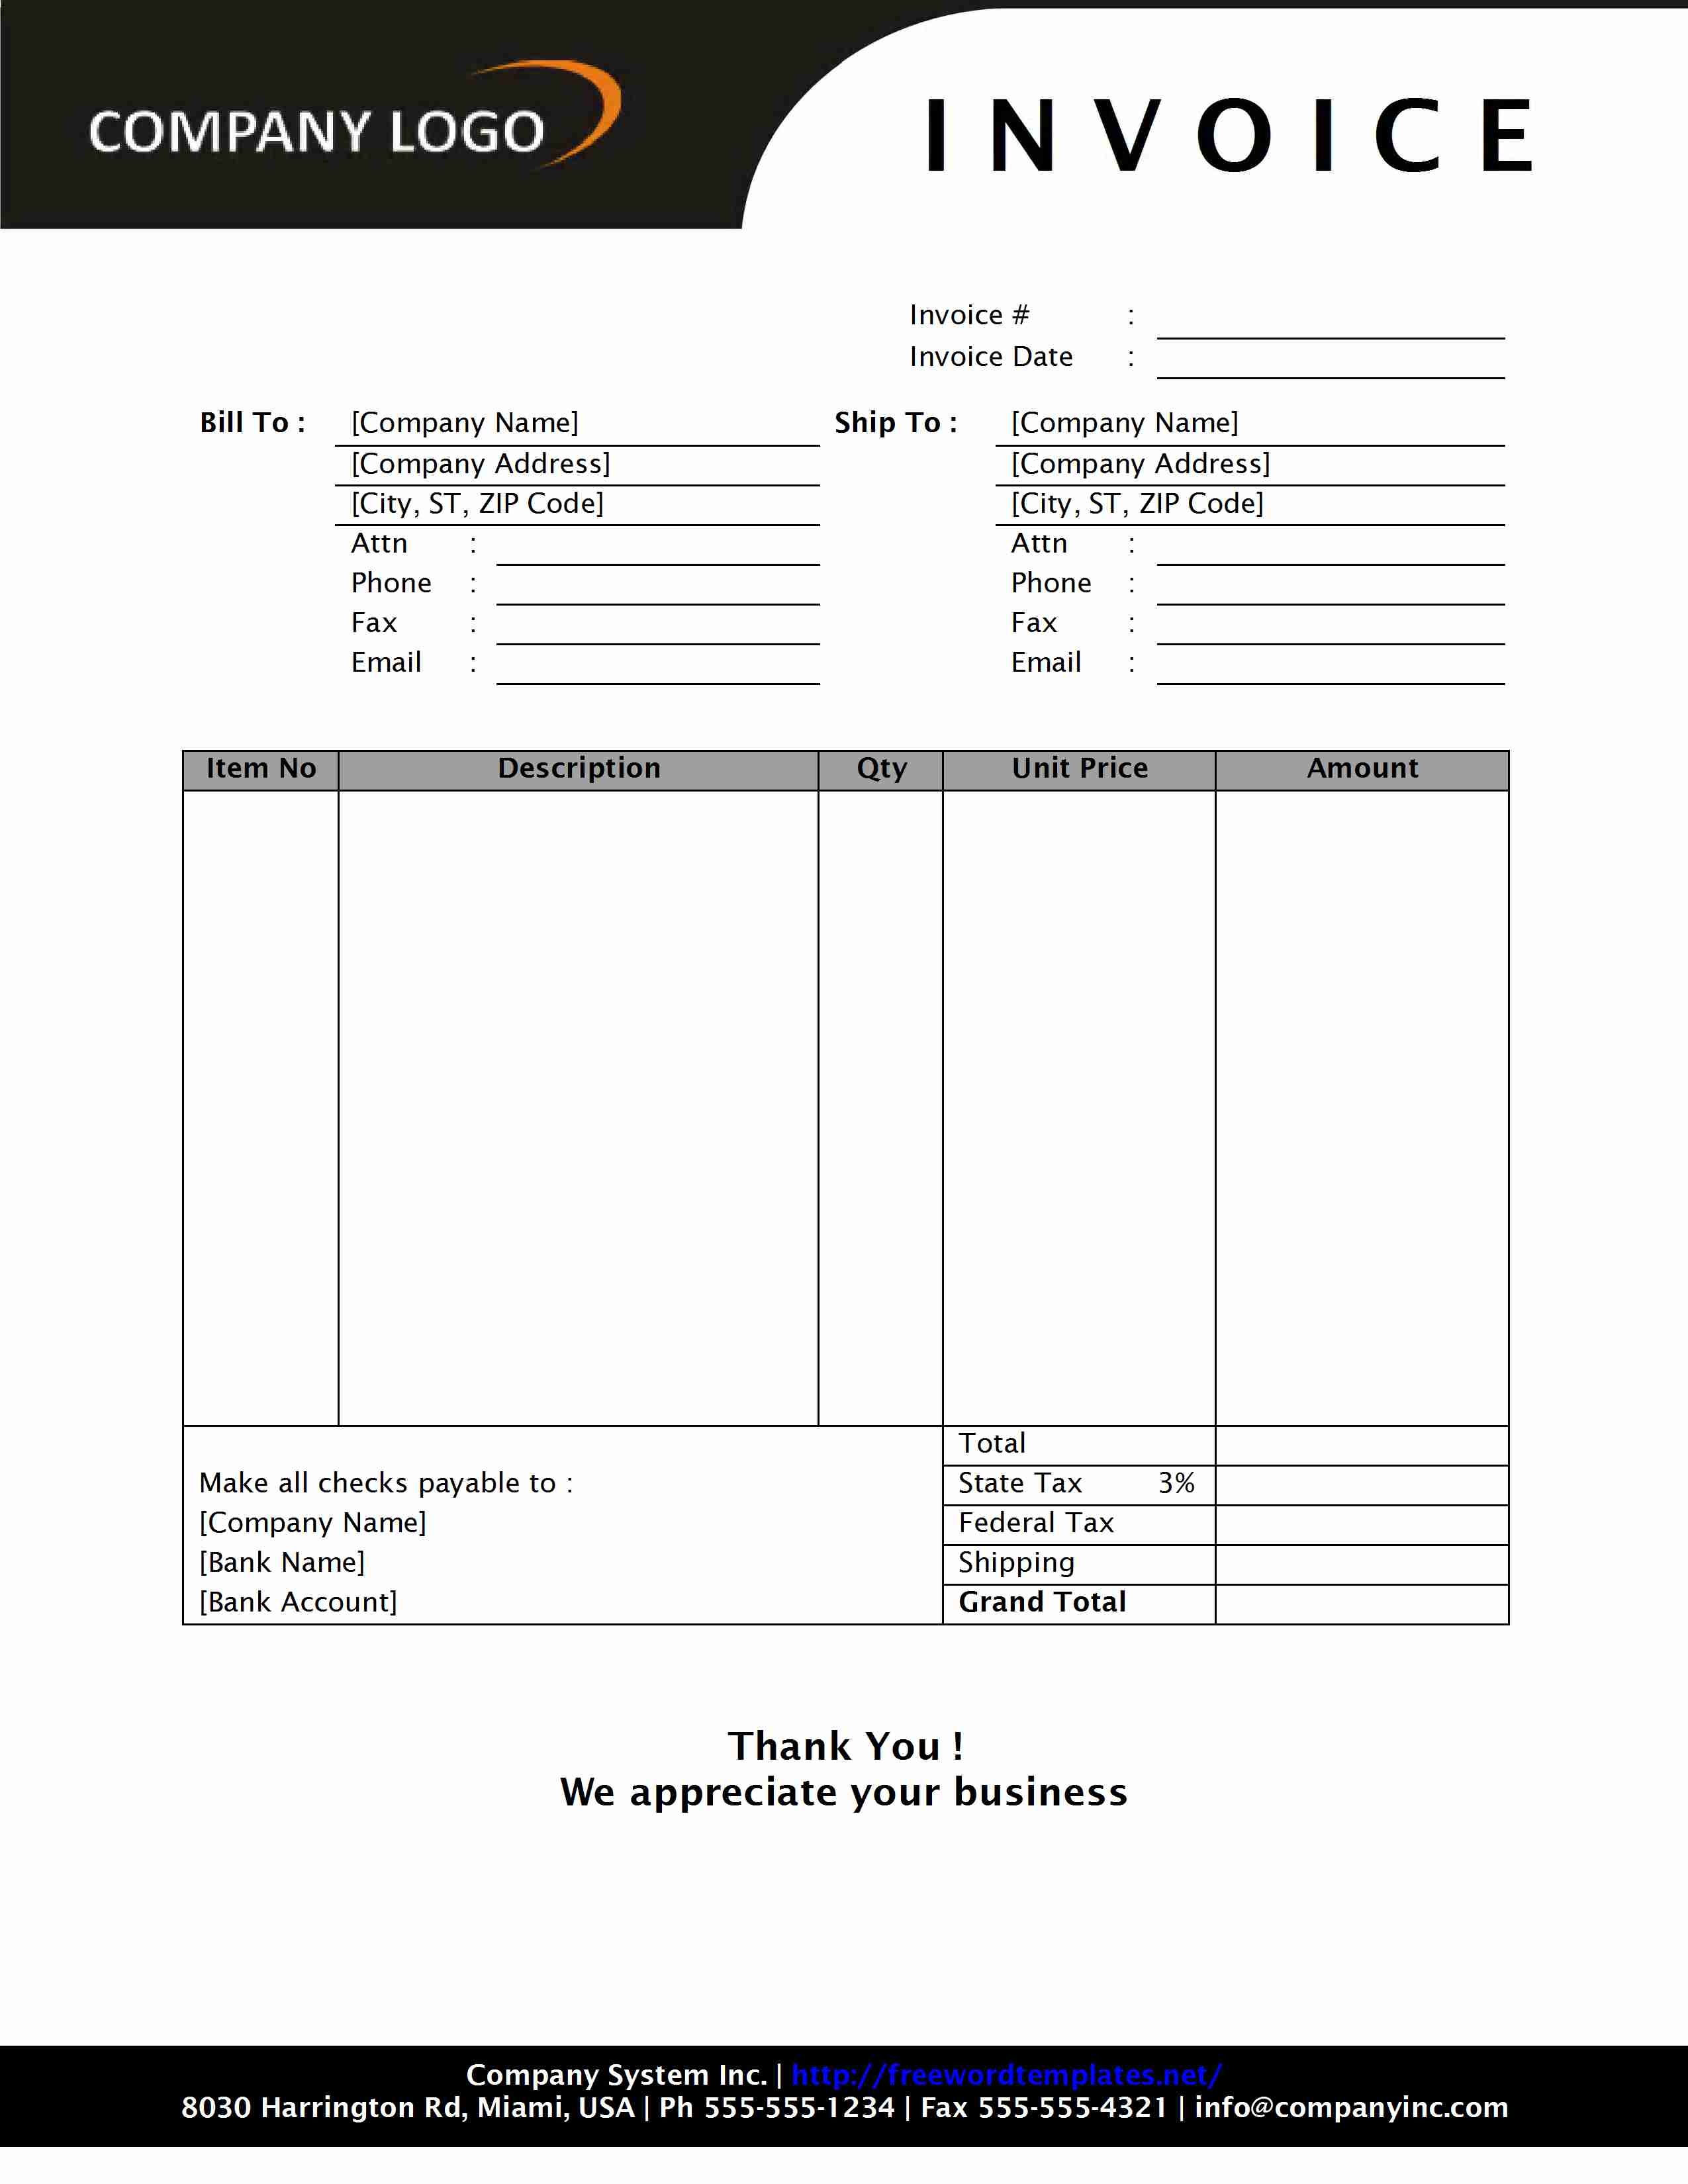 free invoice template downloads 8 format for sales invoice and tips to avoid delay payment 2550 X 3300